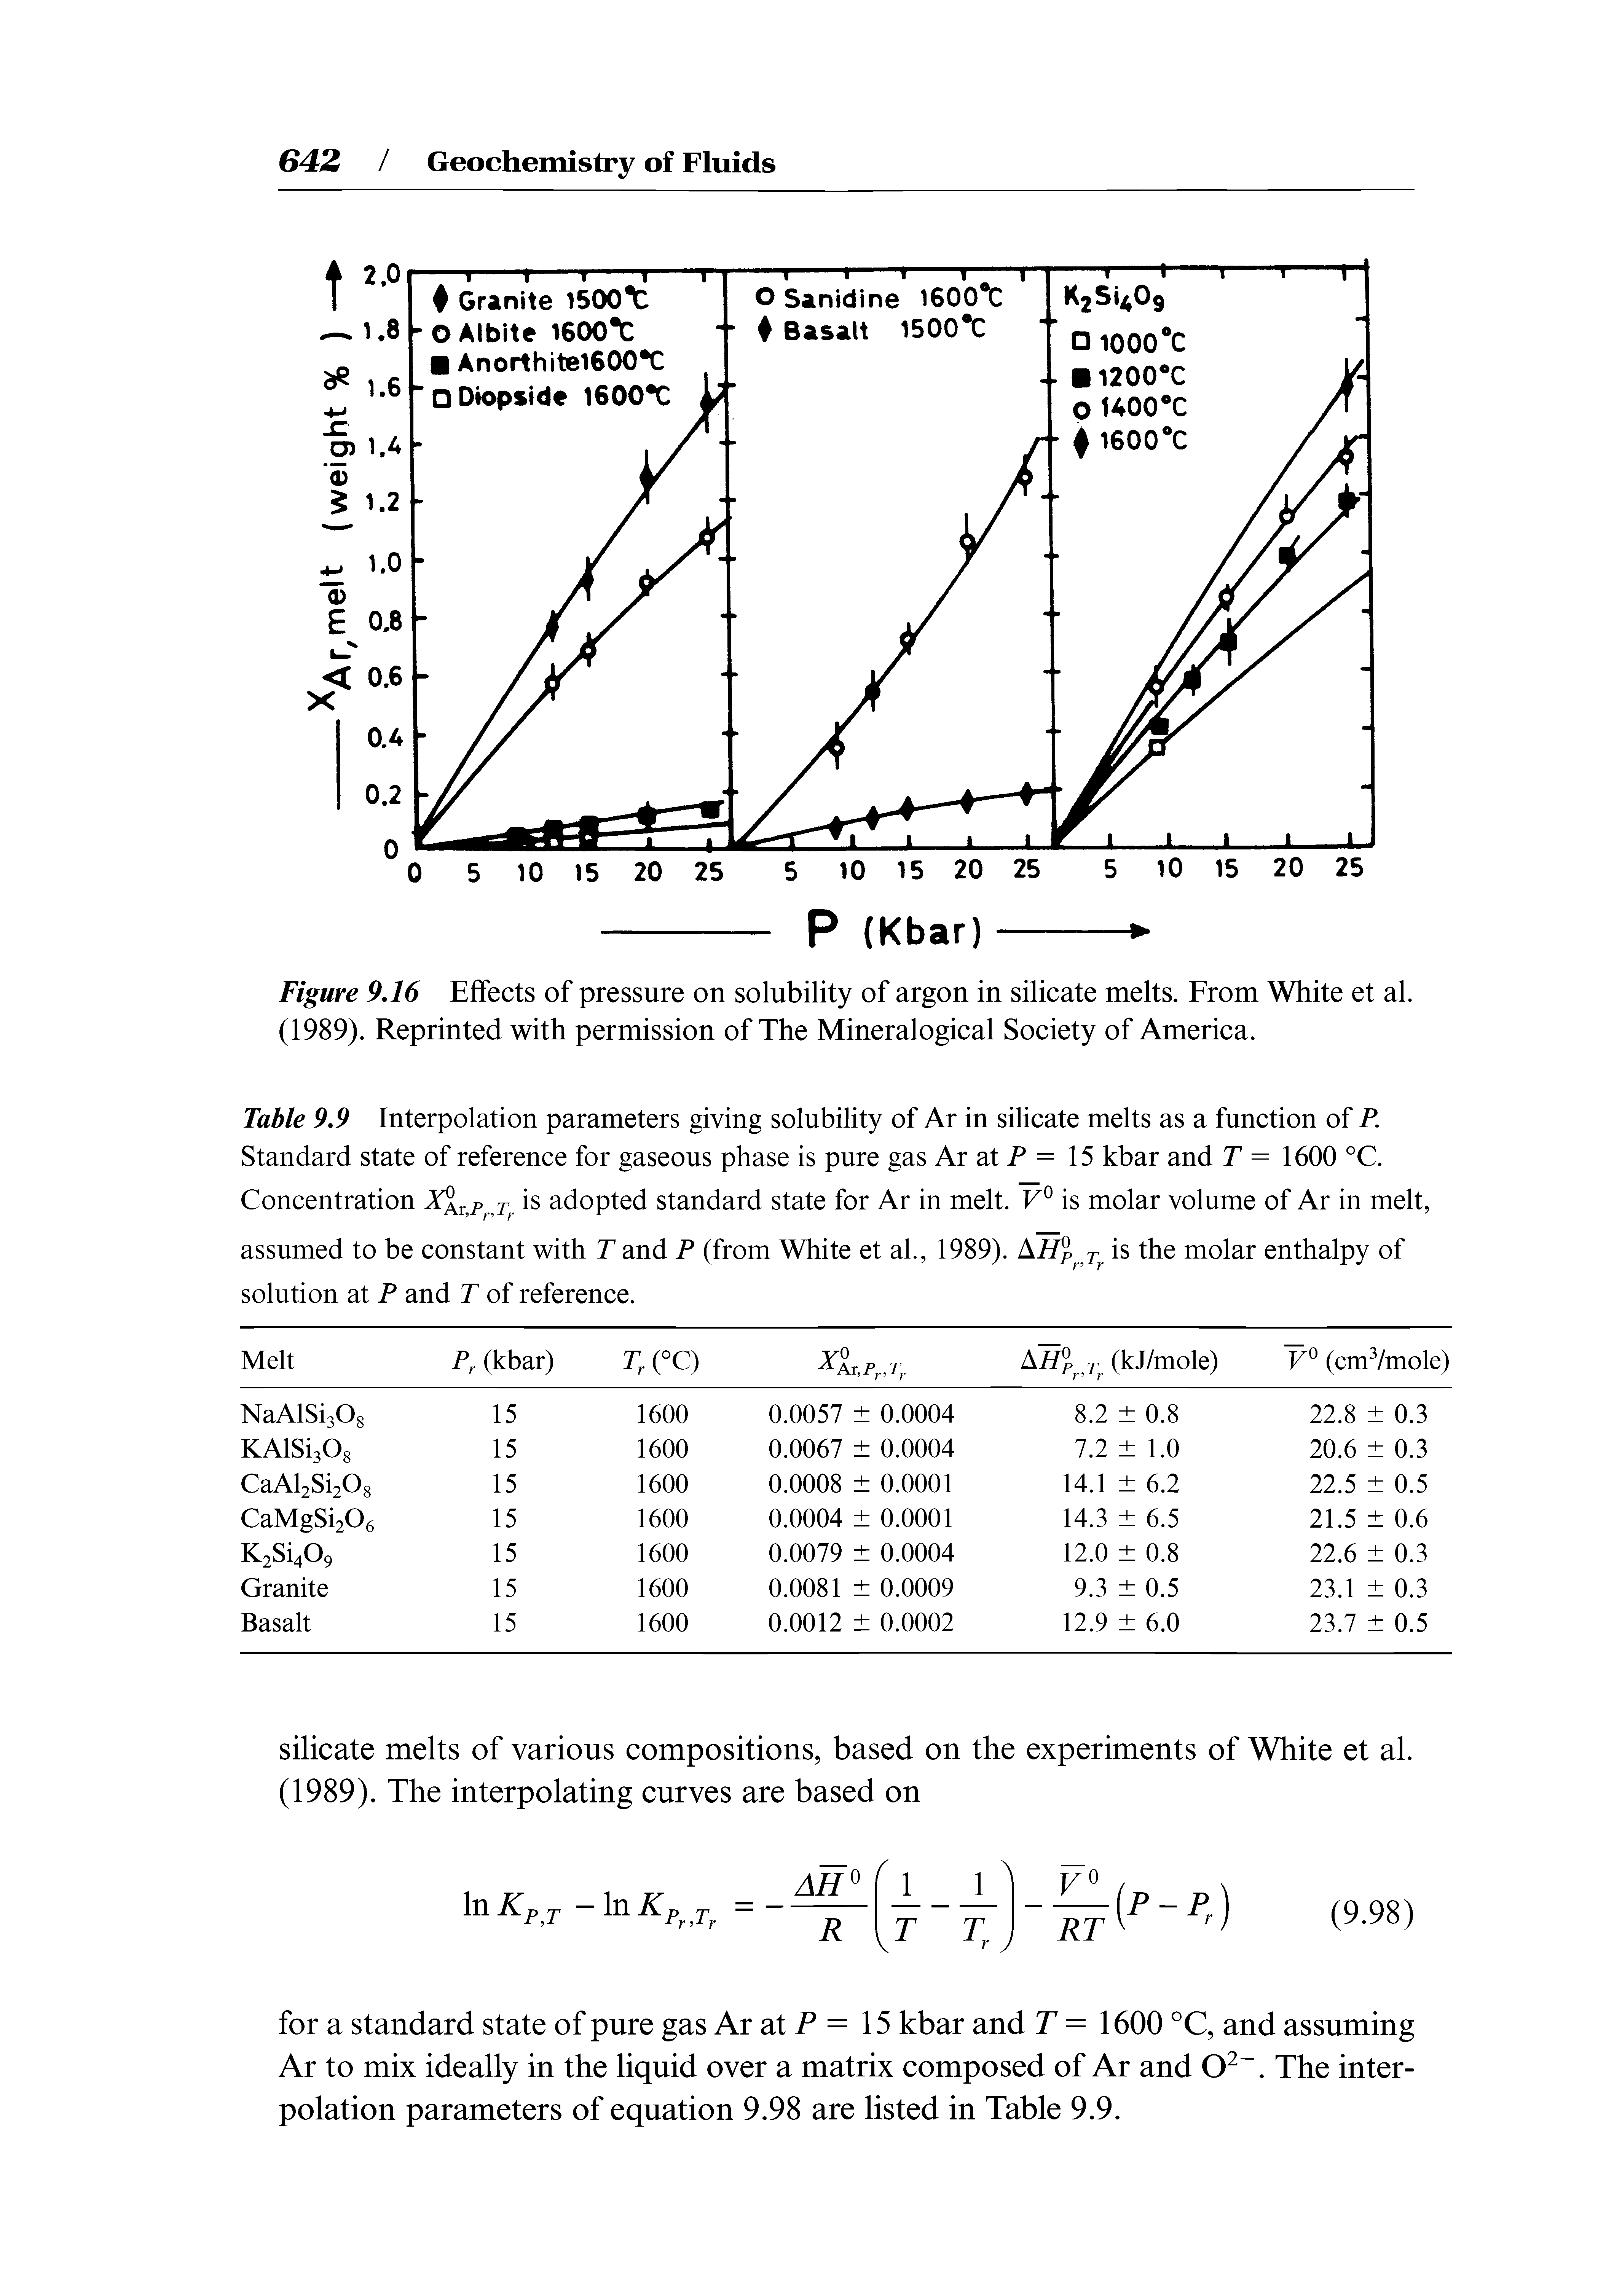 Figure 9J6 Effects of pressure on solubility of argon in silicate melts. From White et al. (1989). Reprinted with permission of The Mineralogical Society of America.